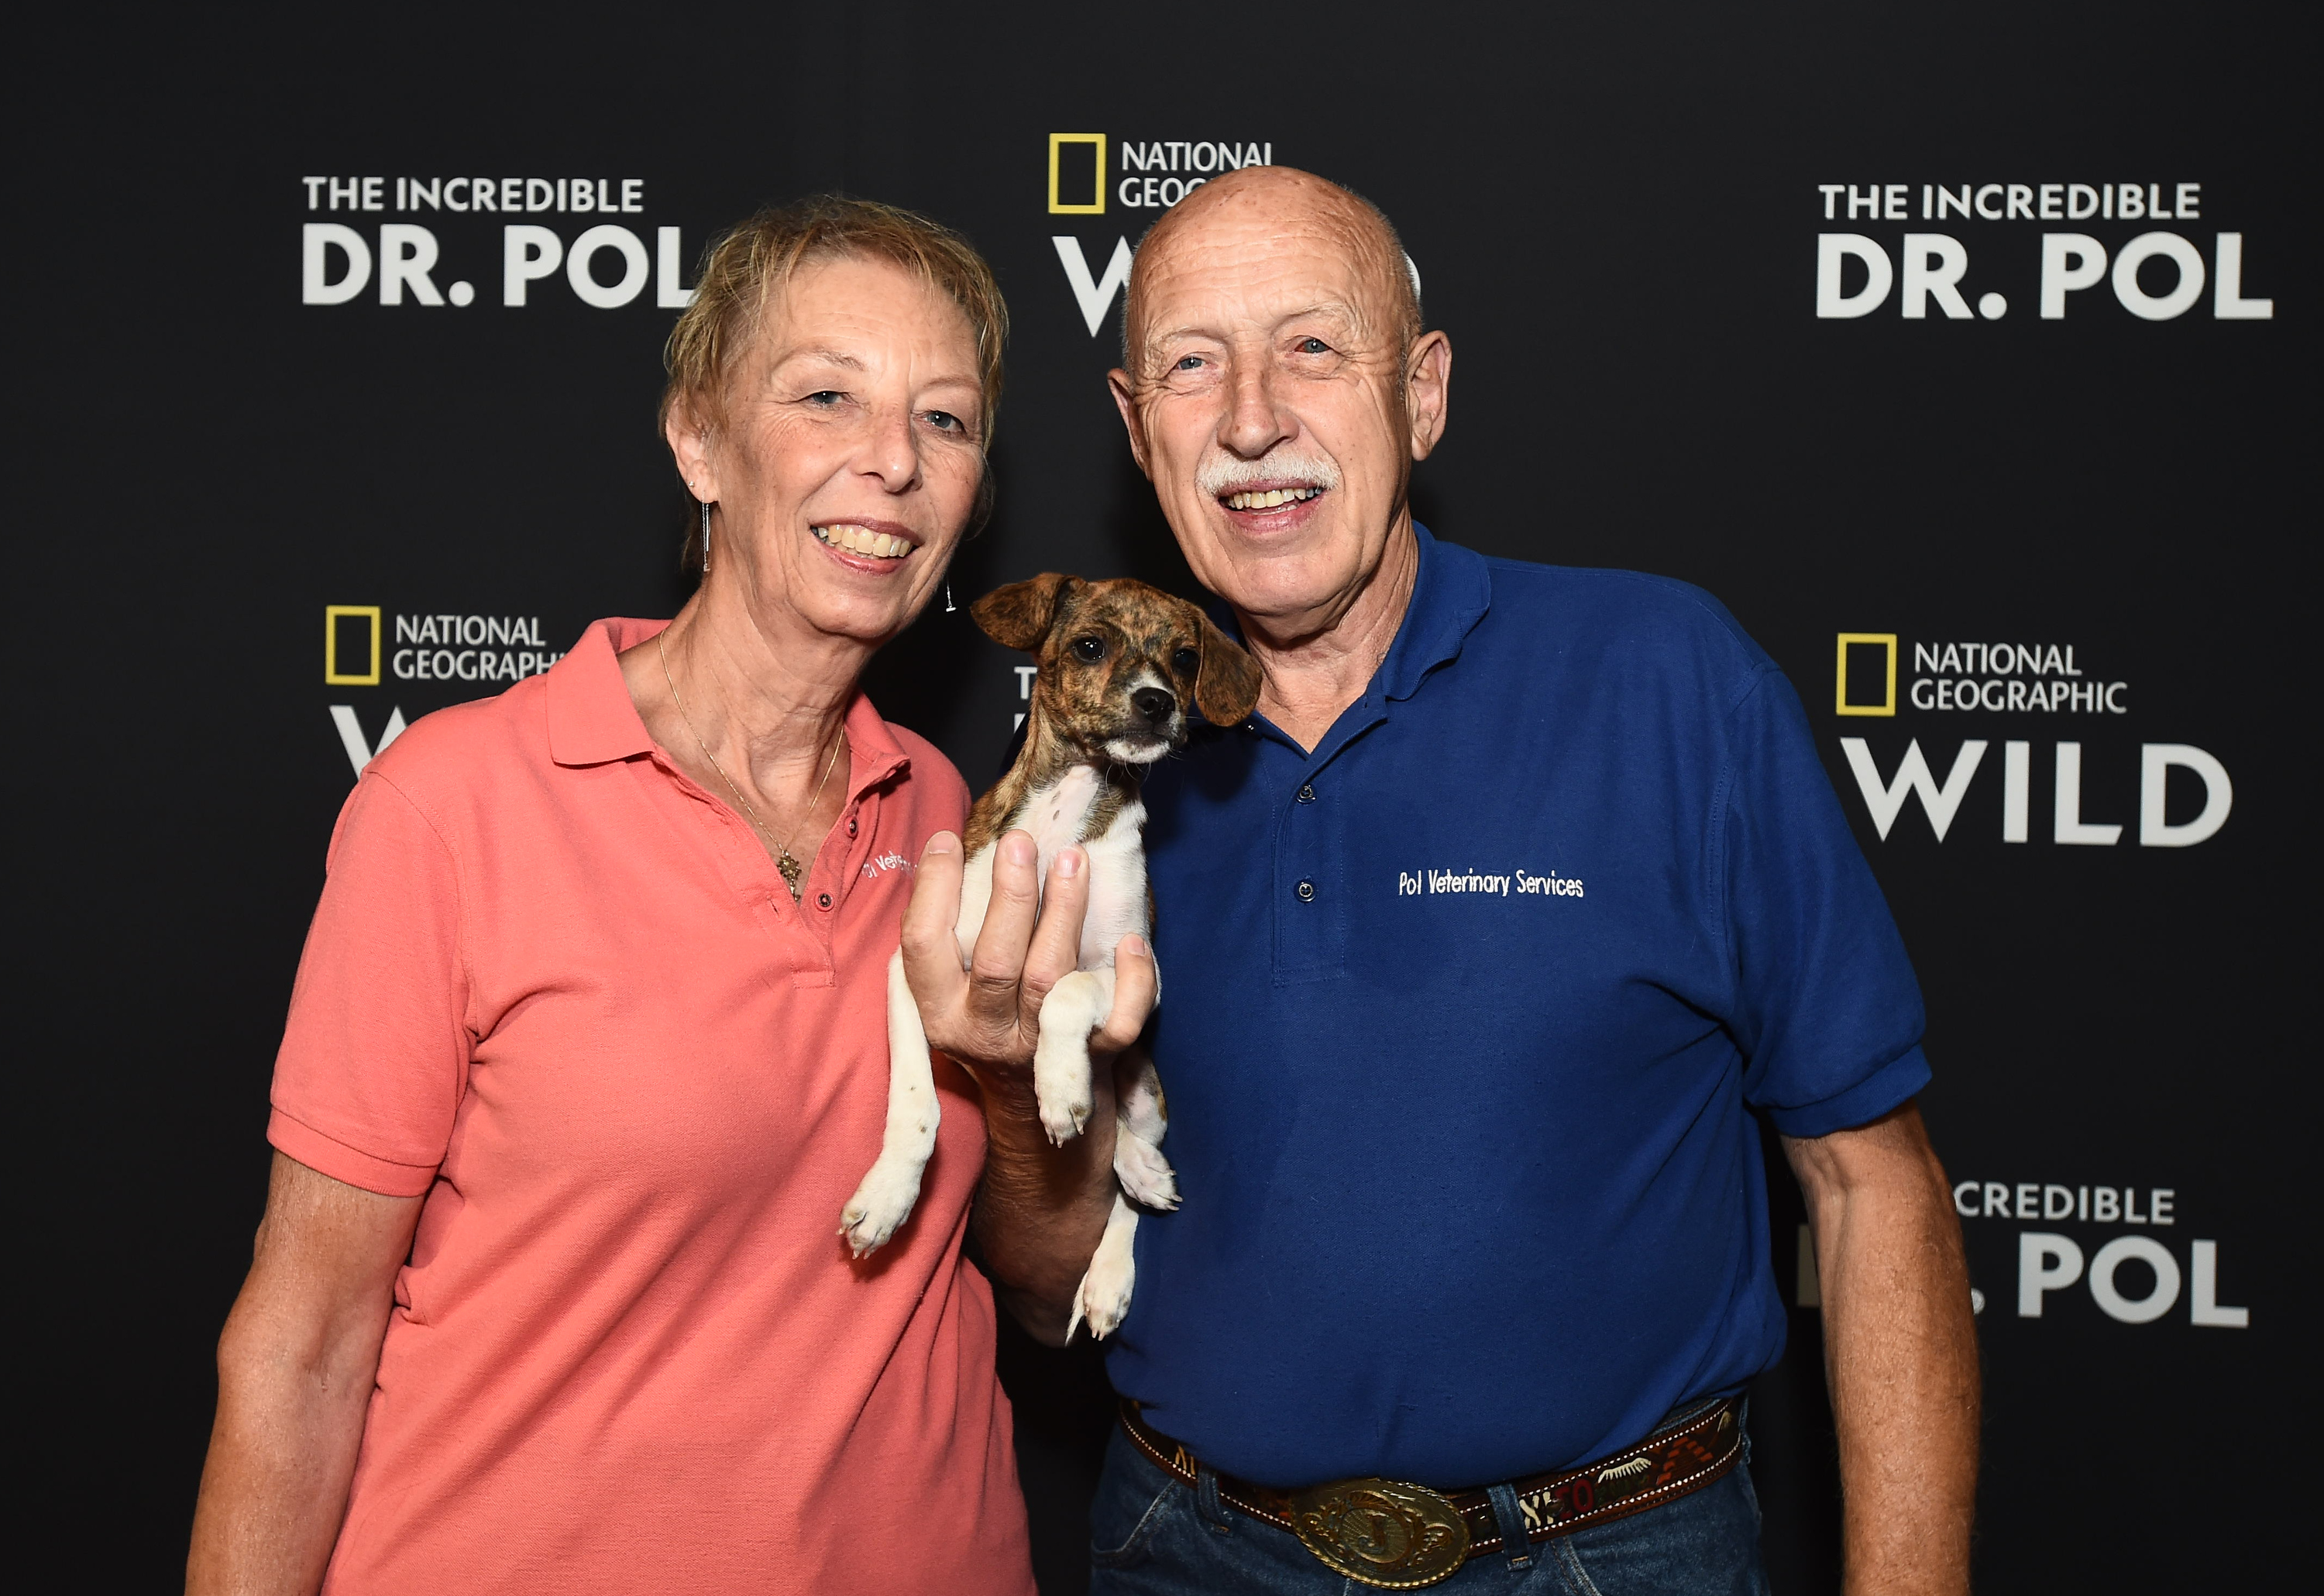 'The Incredible Dr. Pol' cast members Diane Pol and her husband Dr. Jan Pol